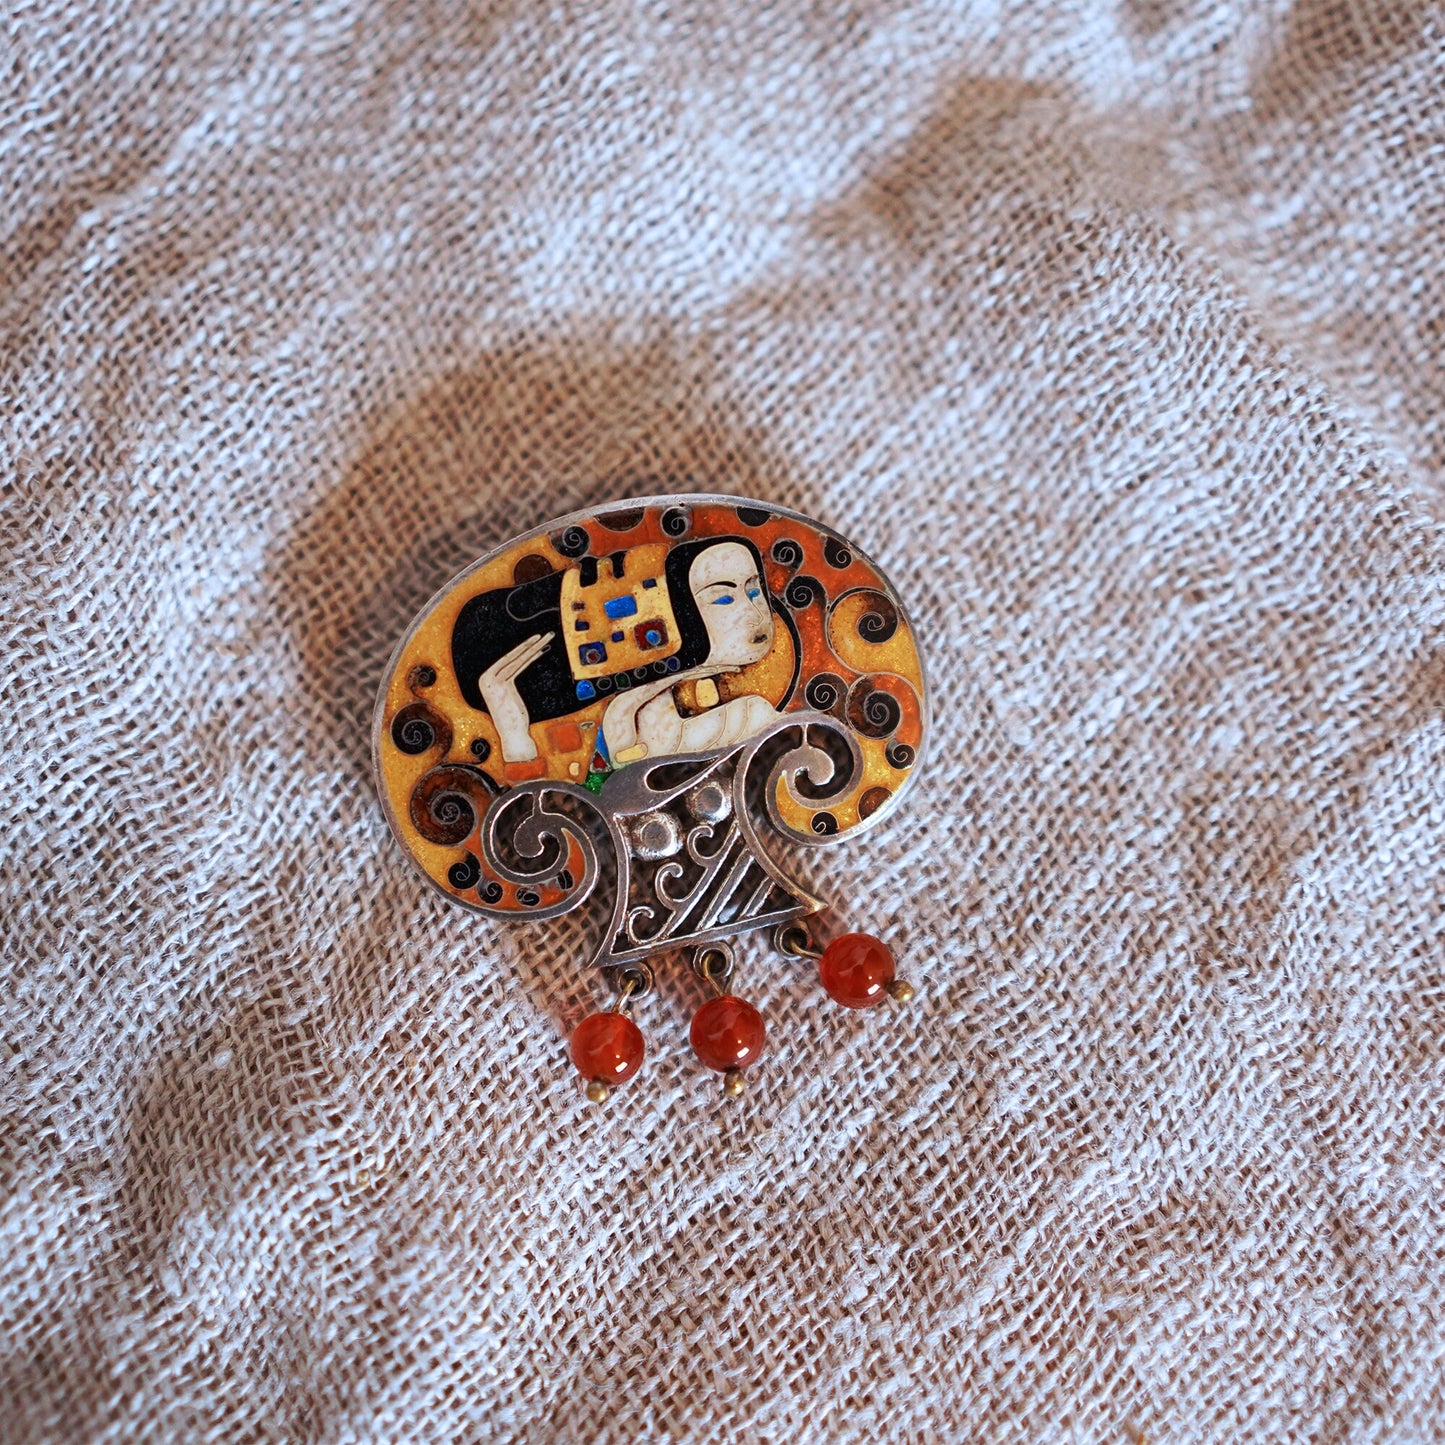 Princess - Handmade Silver Pendant-Brooch with Cloisonné Enamel and Natural Red Amber Beads Inspired by Gustav Klimt's Art